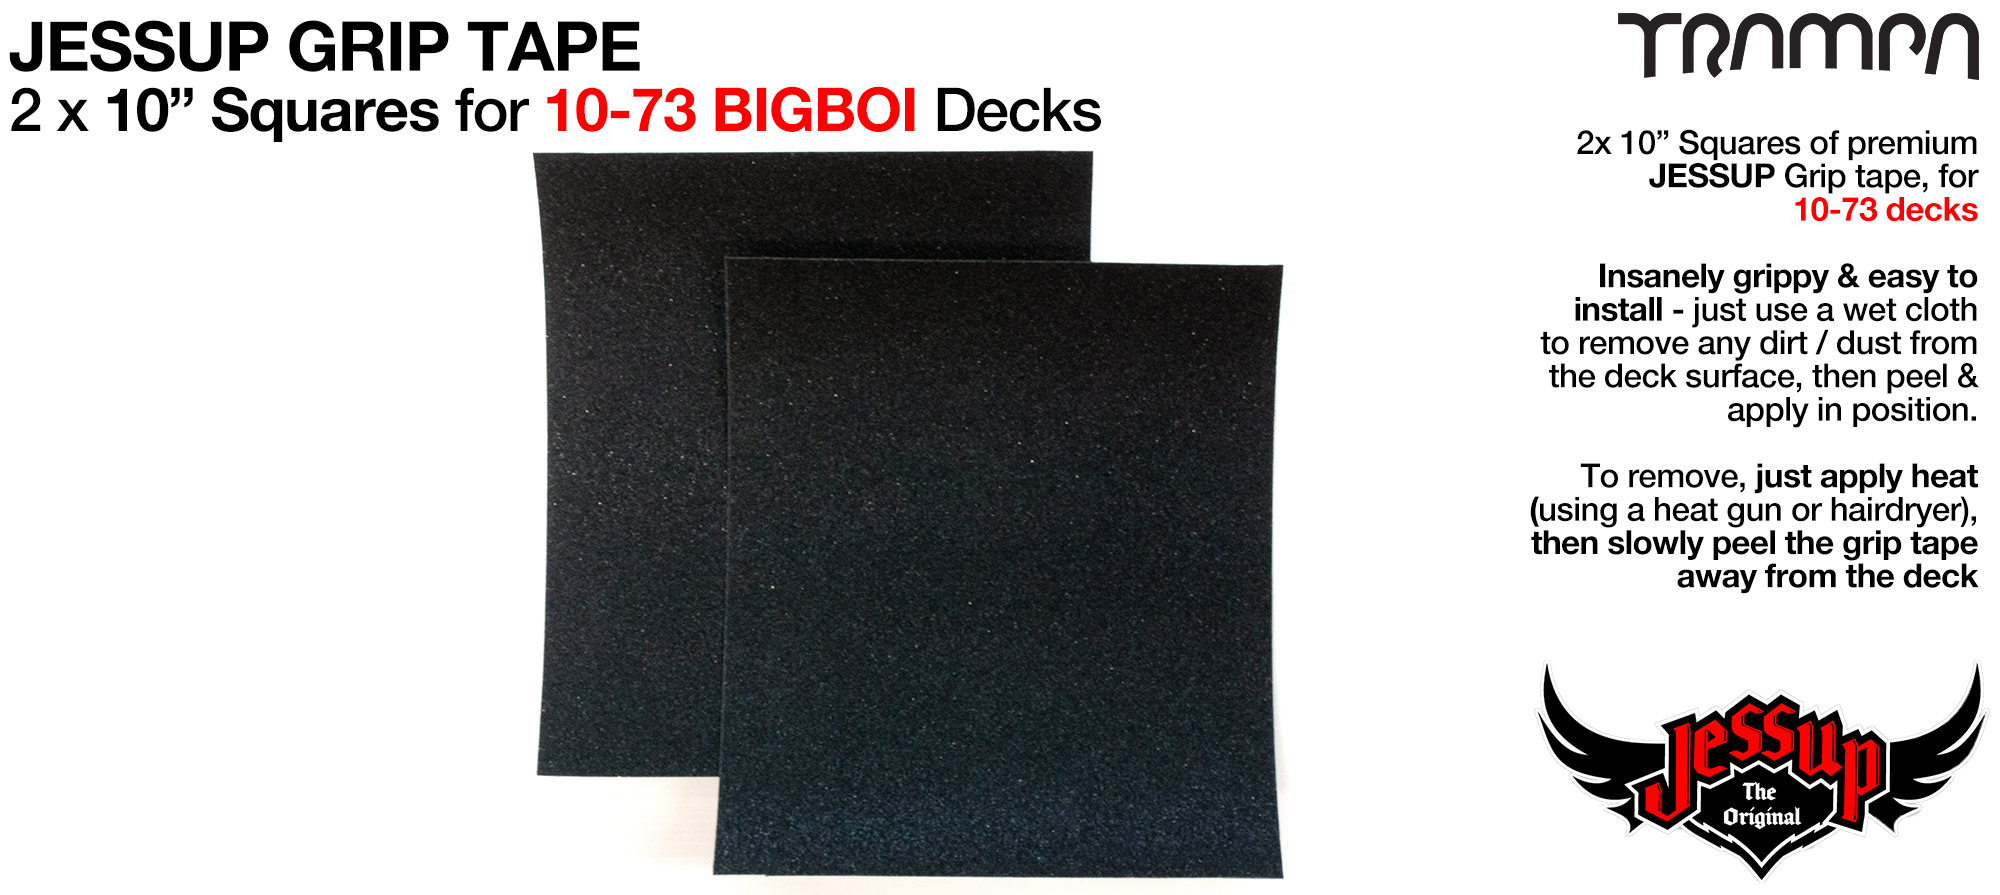 Grip tape - 2 x 10 inch squares for 10-73 Decks - Jessup 